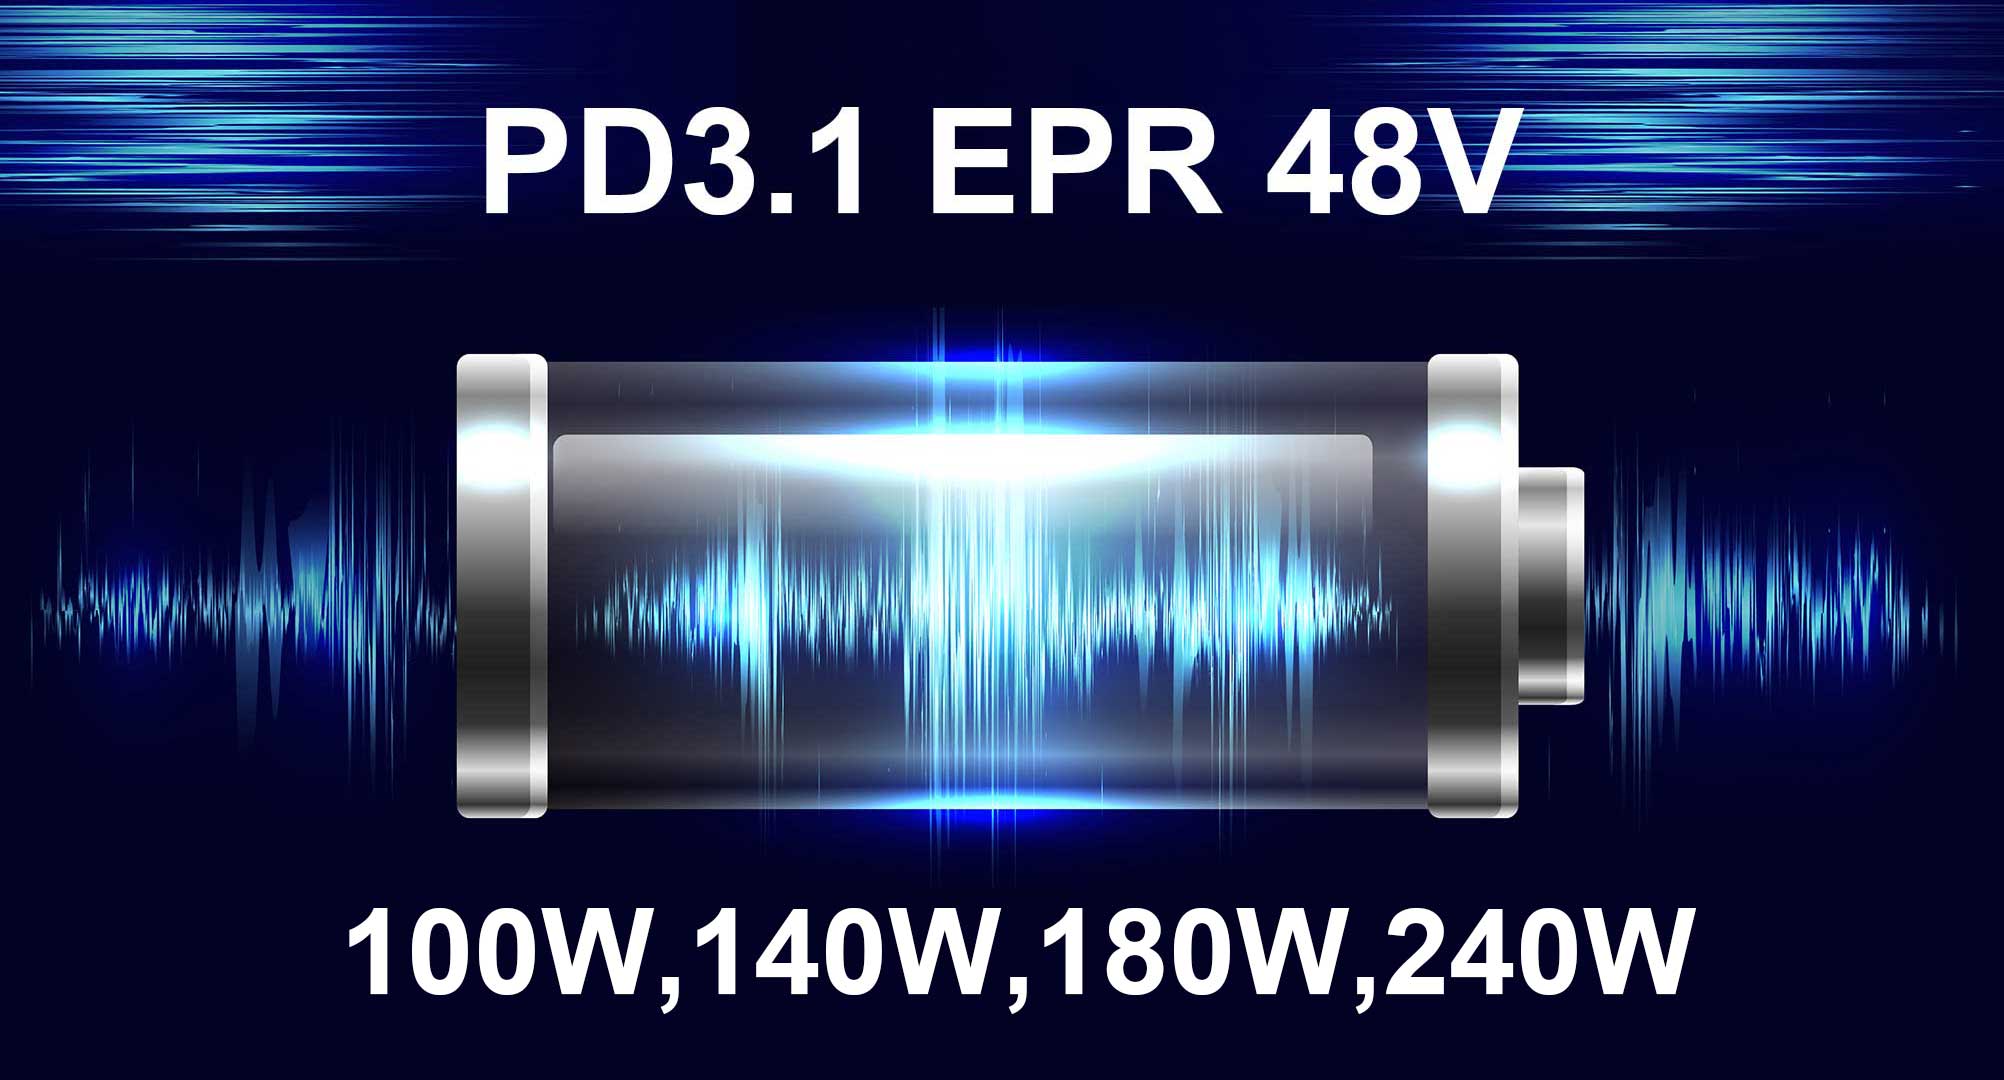 LVSUN Launches PD3.1 EPR 48V New Product Series, Leading the Charging Industry into a New Era